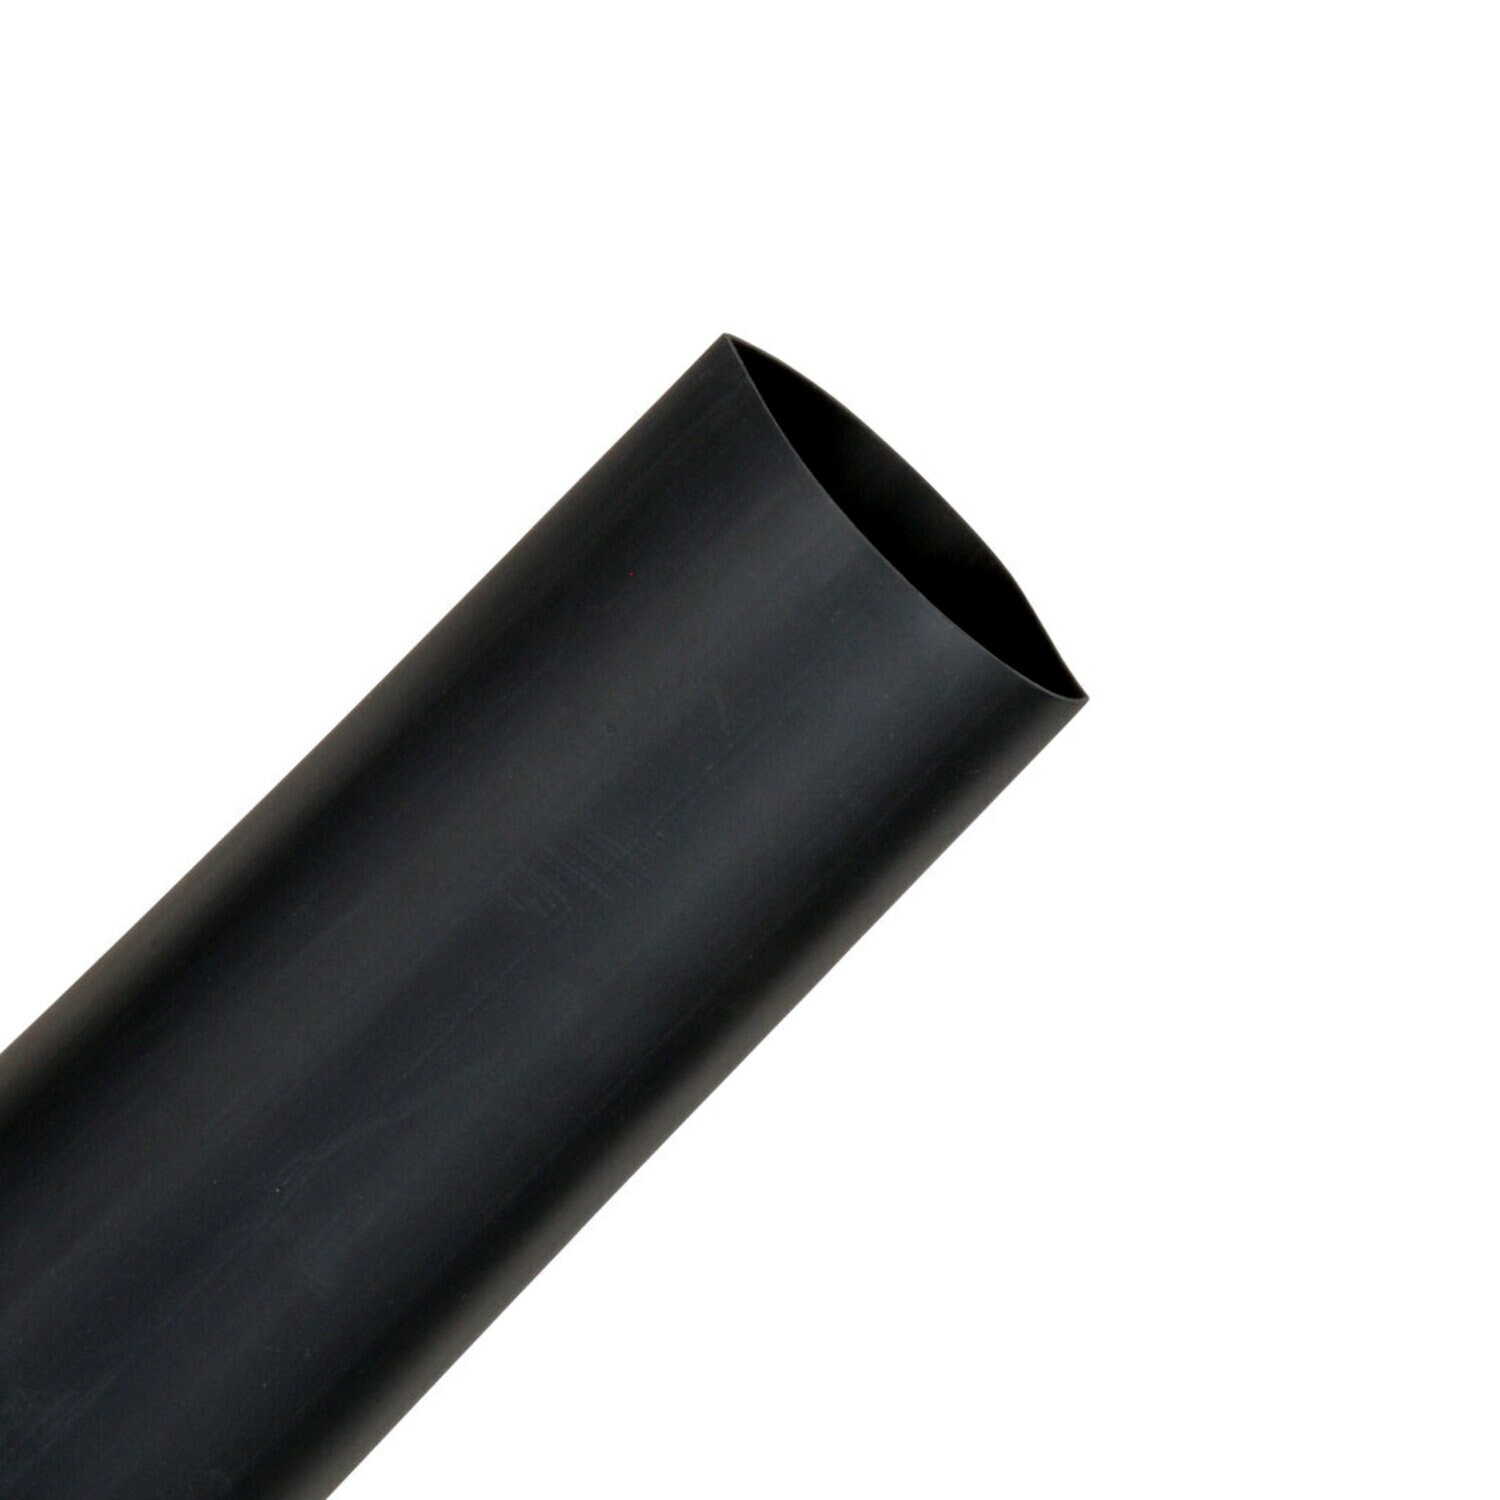 7100083087 - 3M Heat Shrink Thin-Wall Tubing FP-301-2-48"-Black-24 Pcs, 48 in Length
sticks, 24 pieces/case